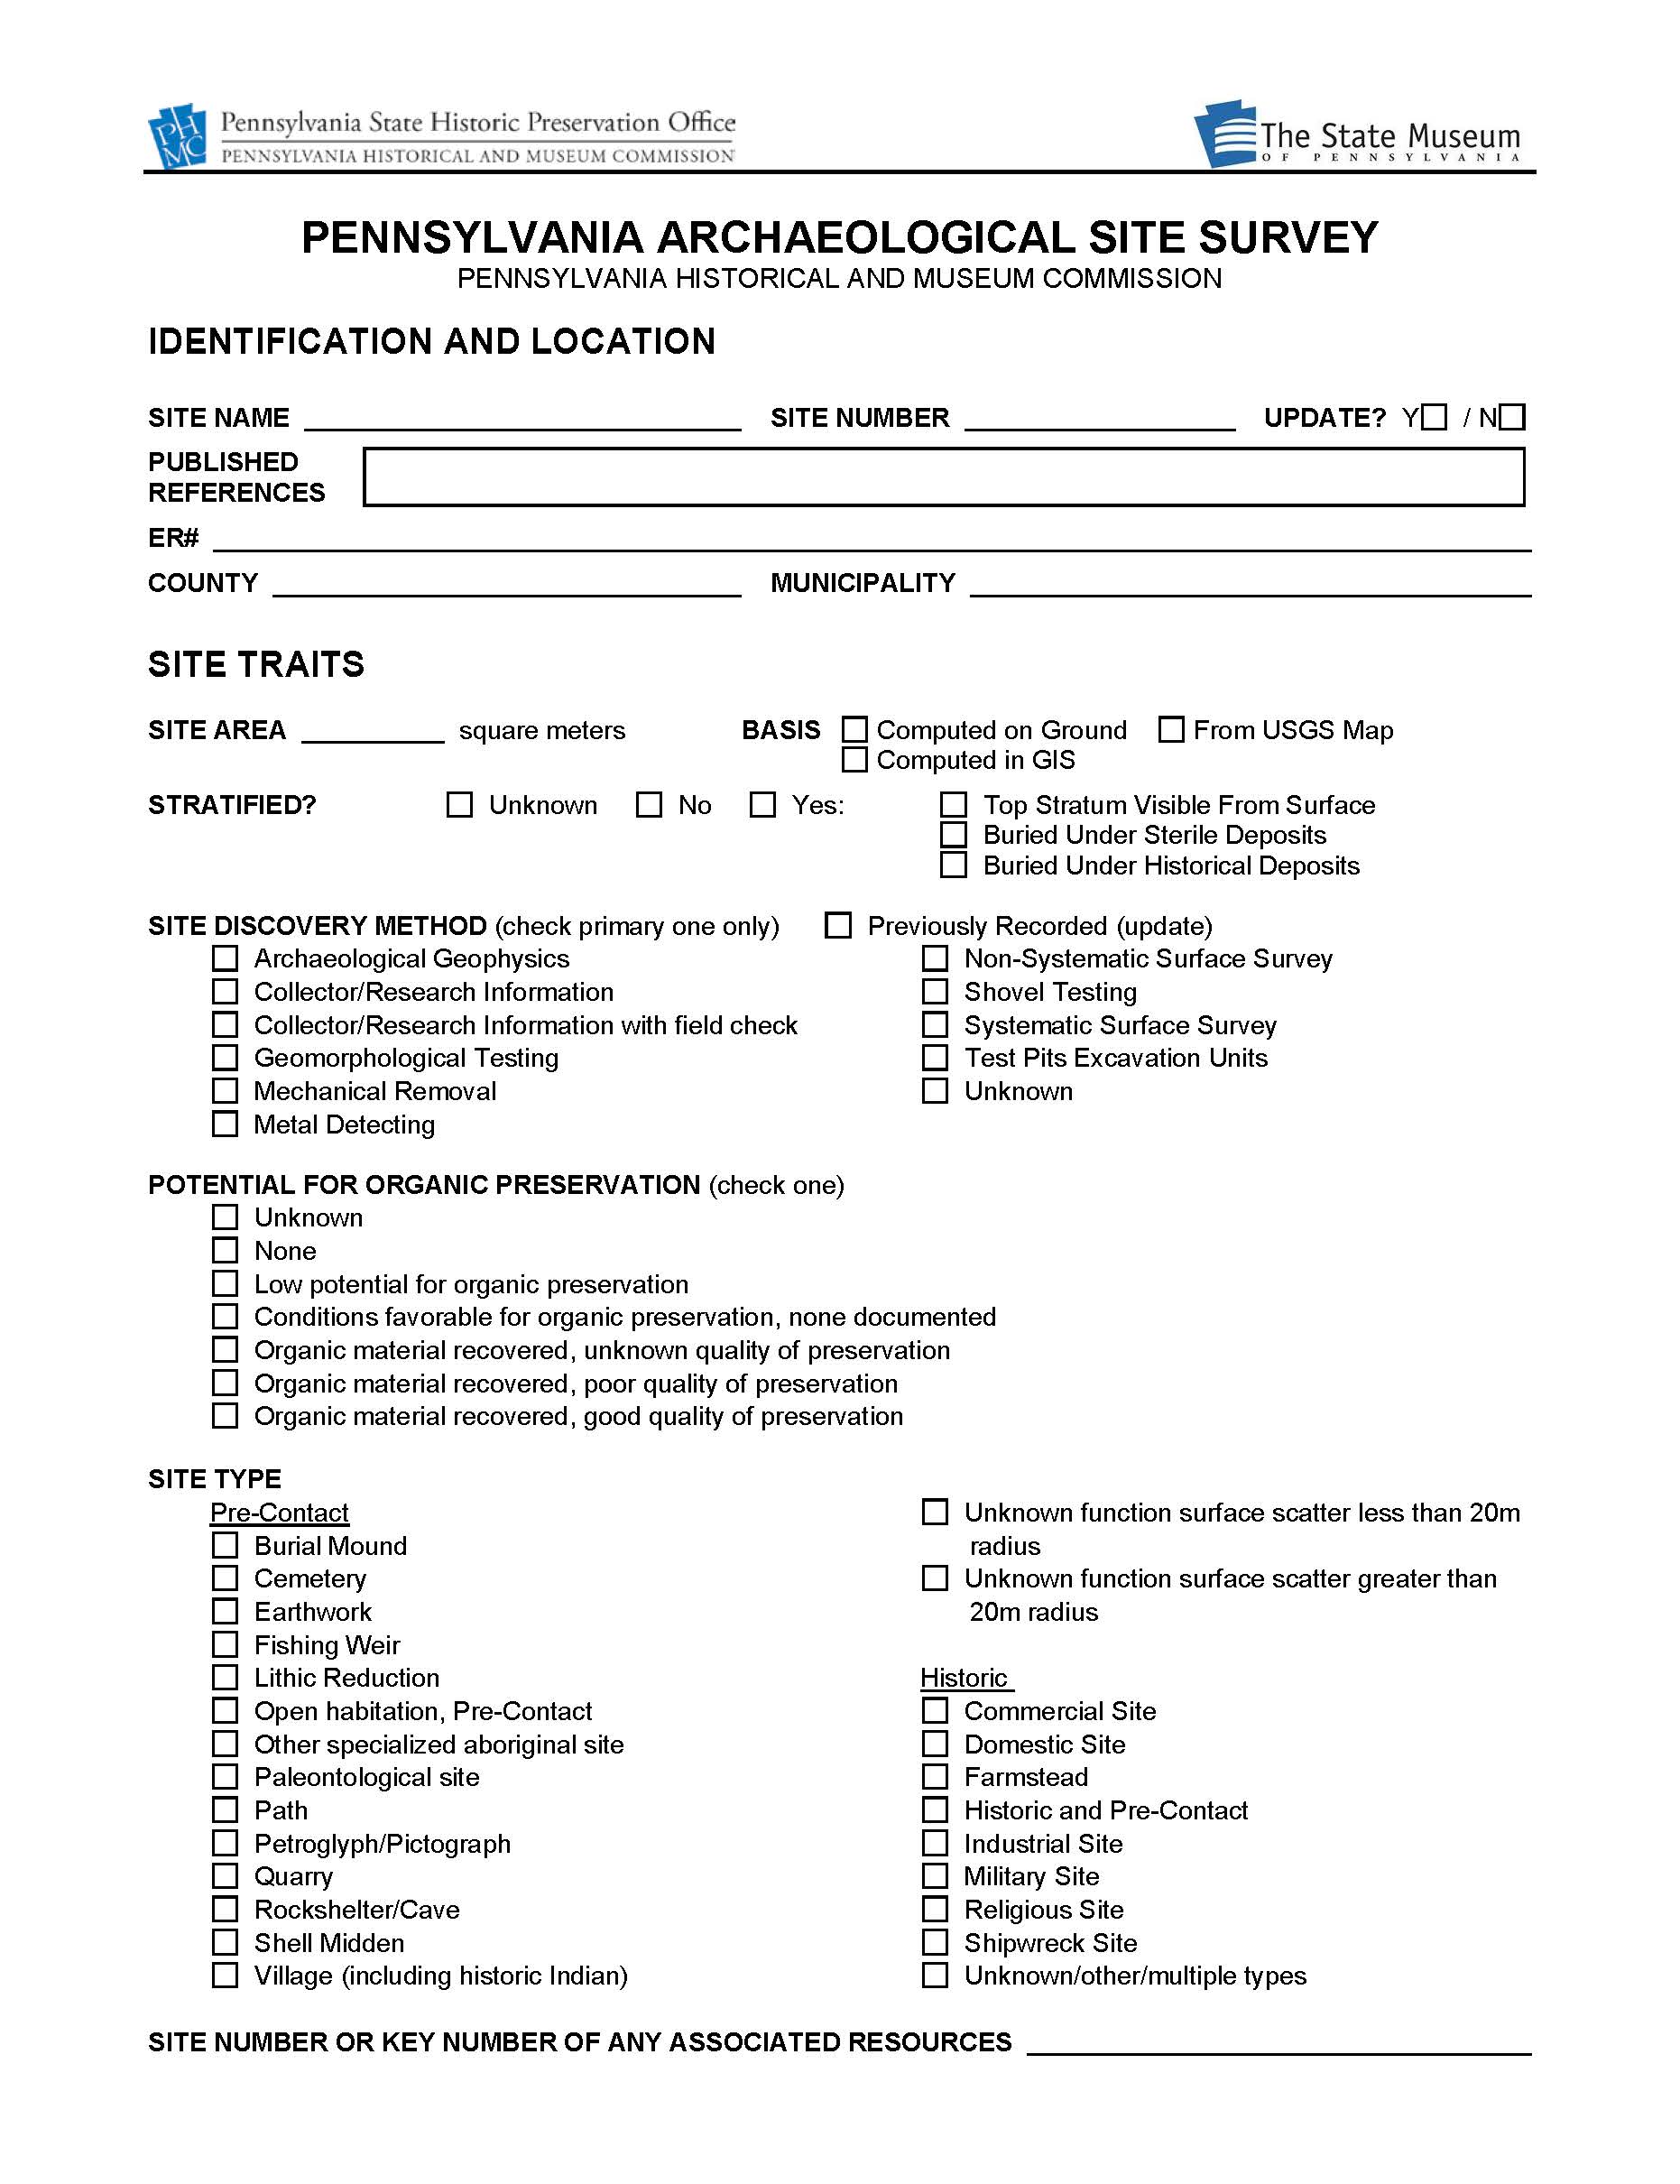 In addition to substantive changes, the PASS form has gotten a slight “make-over” to look more like other SHPO forms.